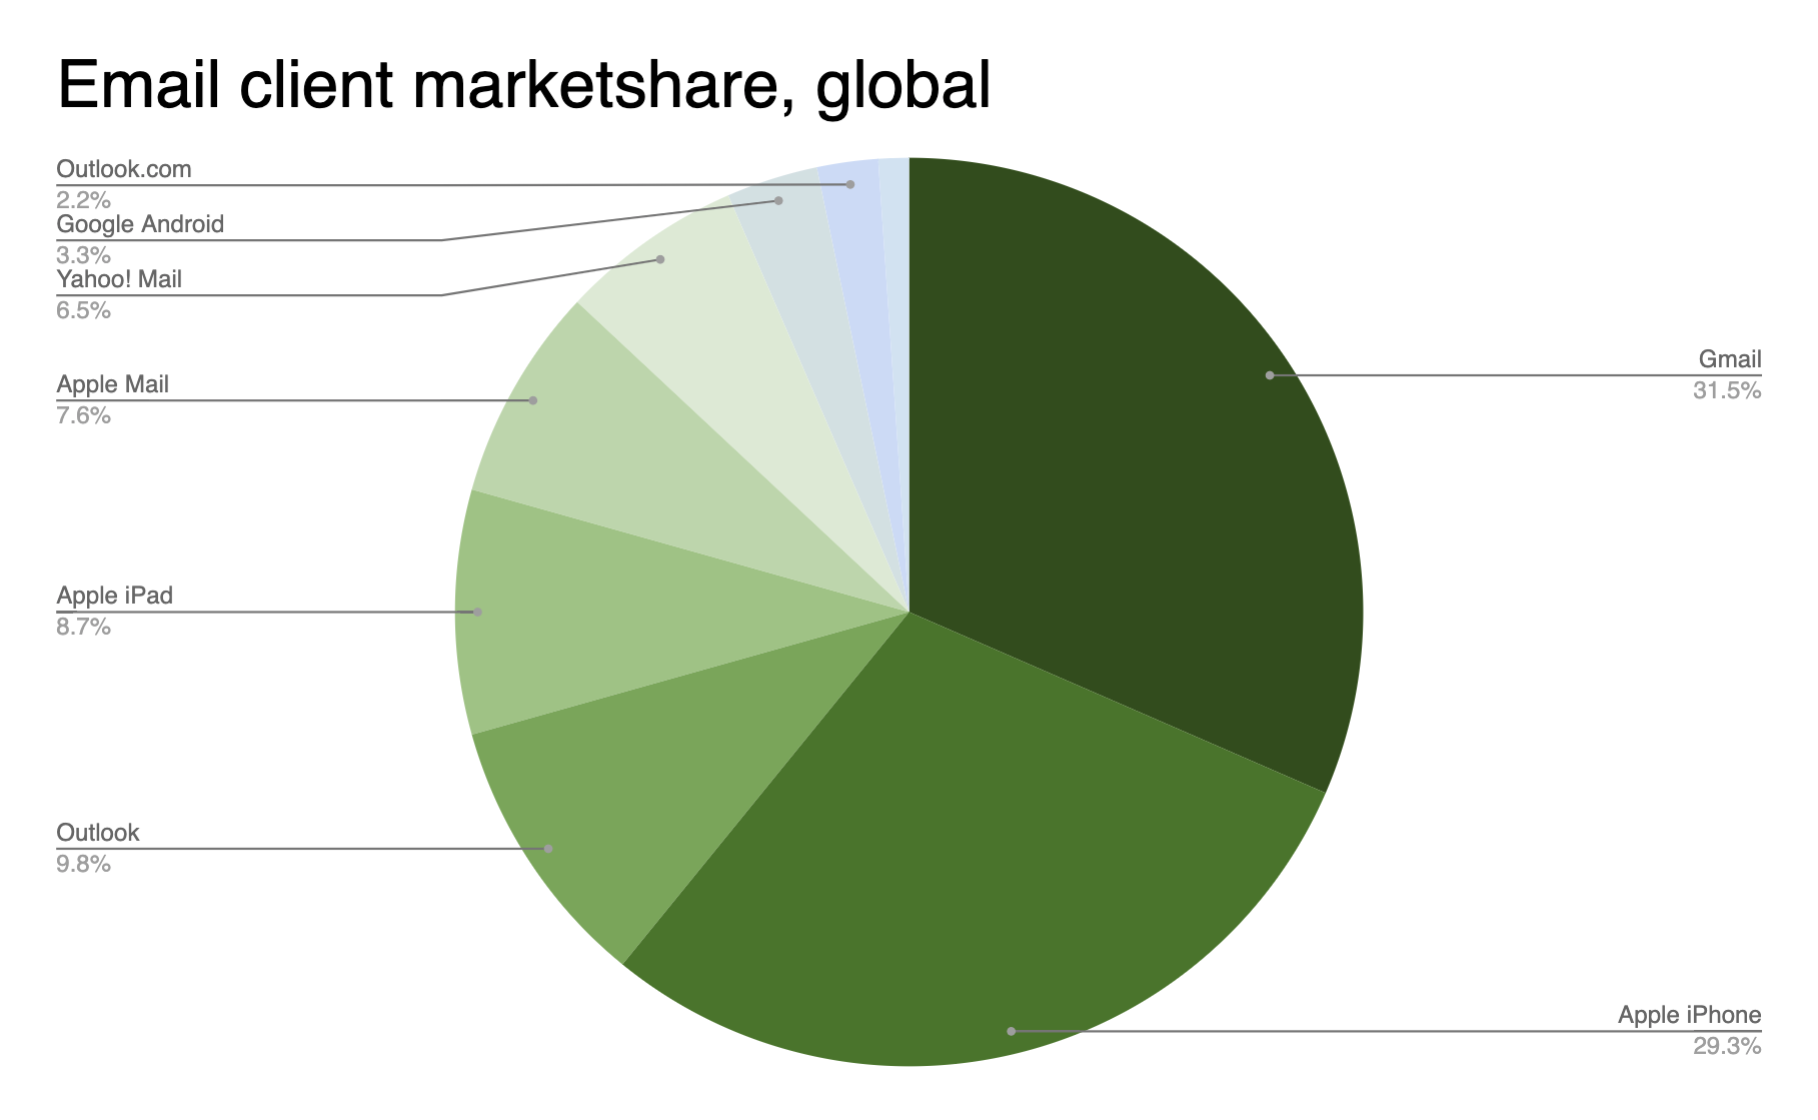 pie chart showing the market share of different email clients